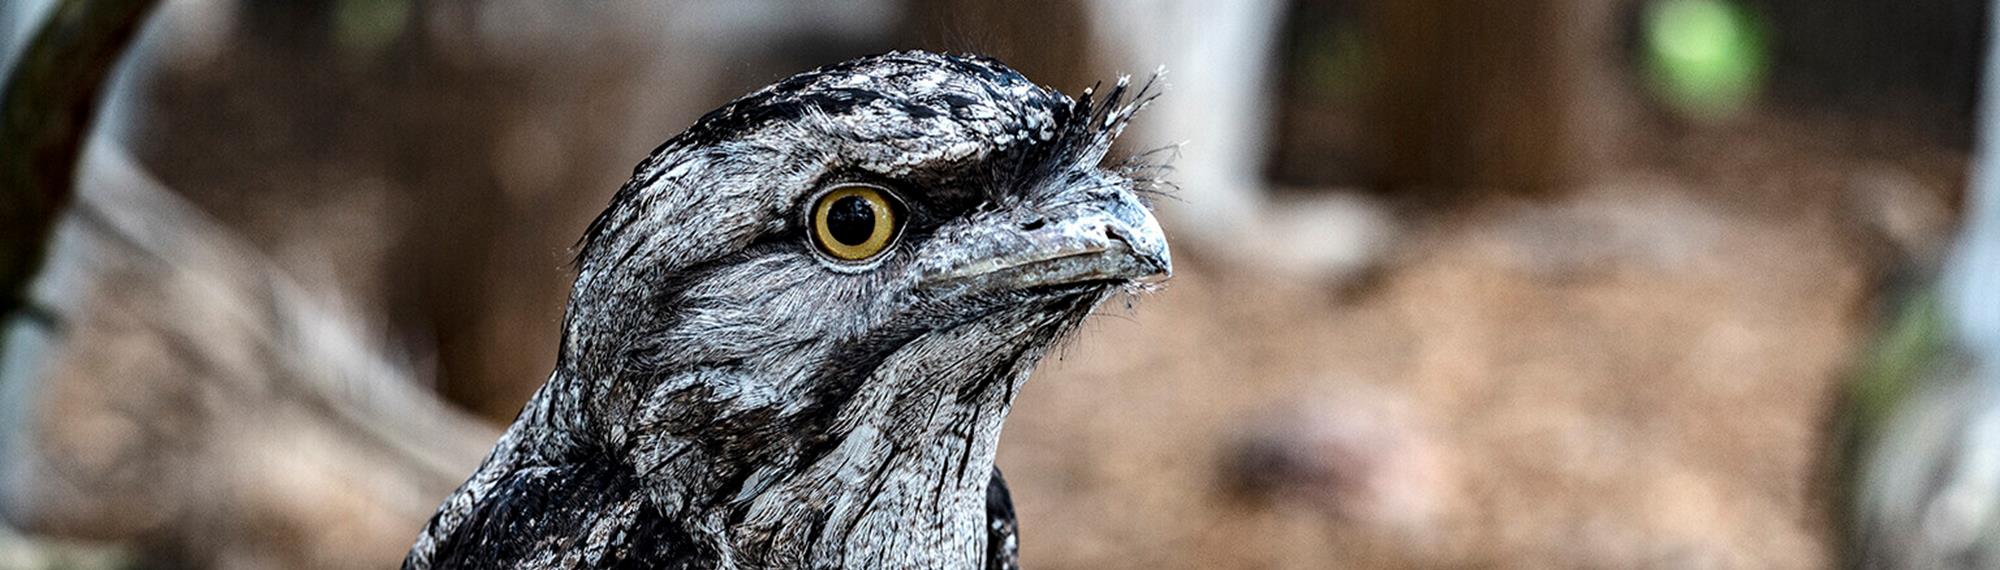 Close up of a Tawny Frogmouth bird with yellow eyes and a pointed beak.